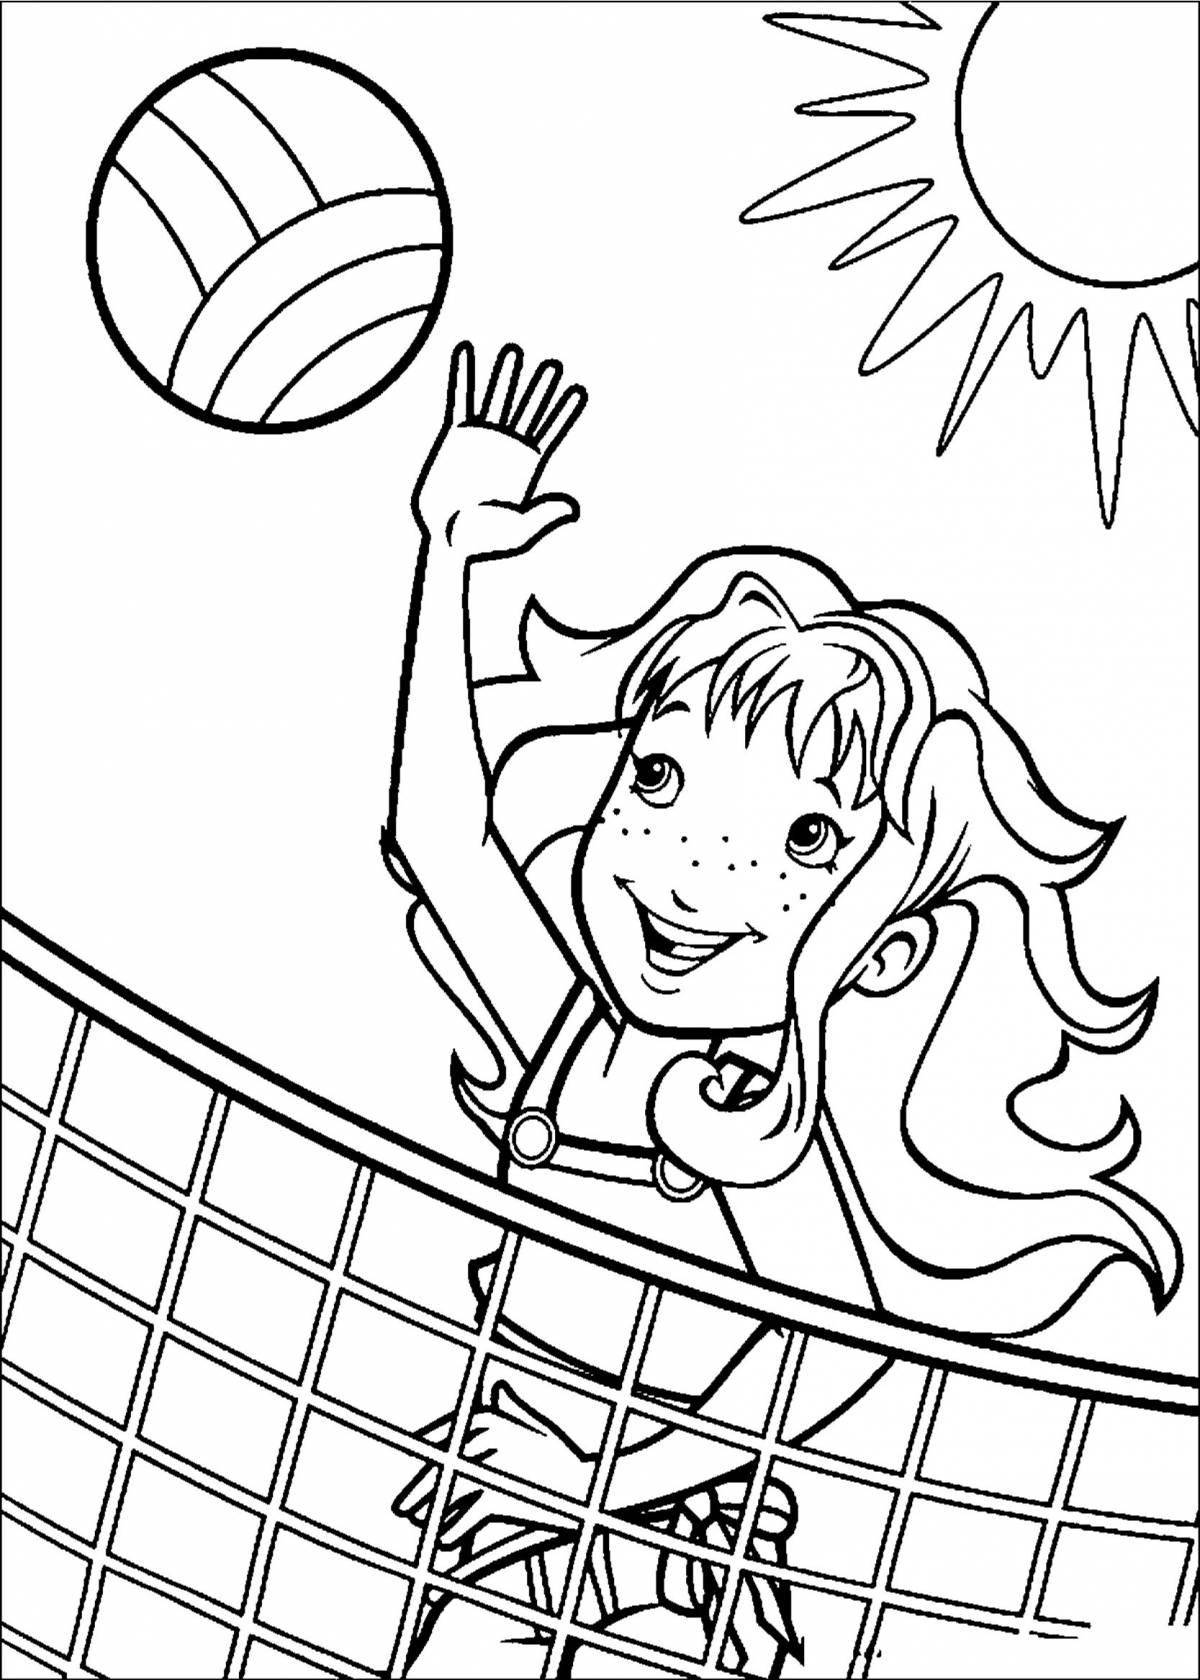 Radiant sports coloring page